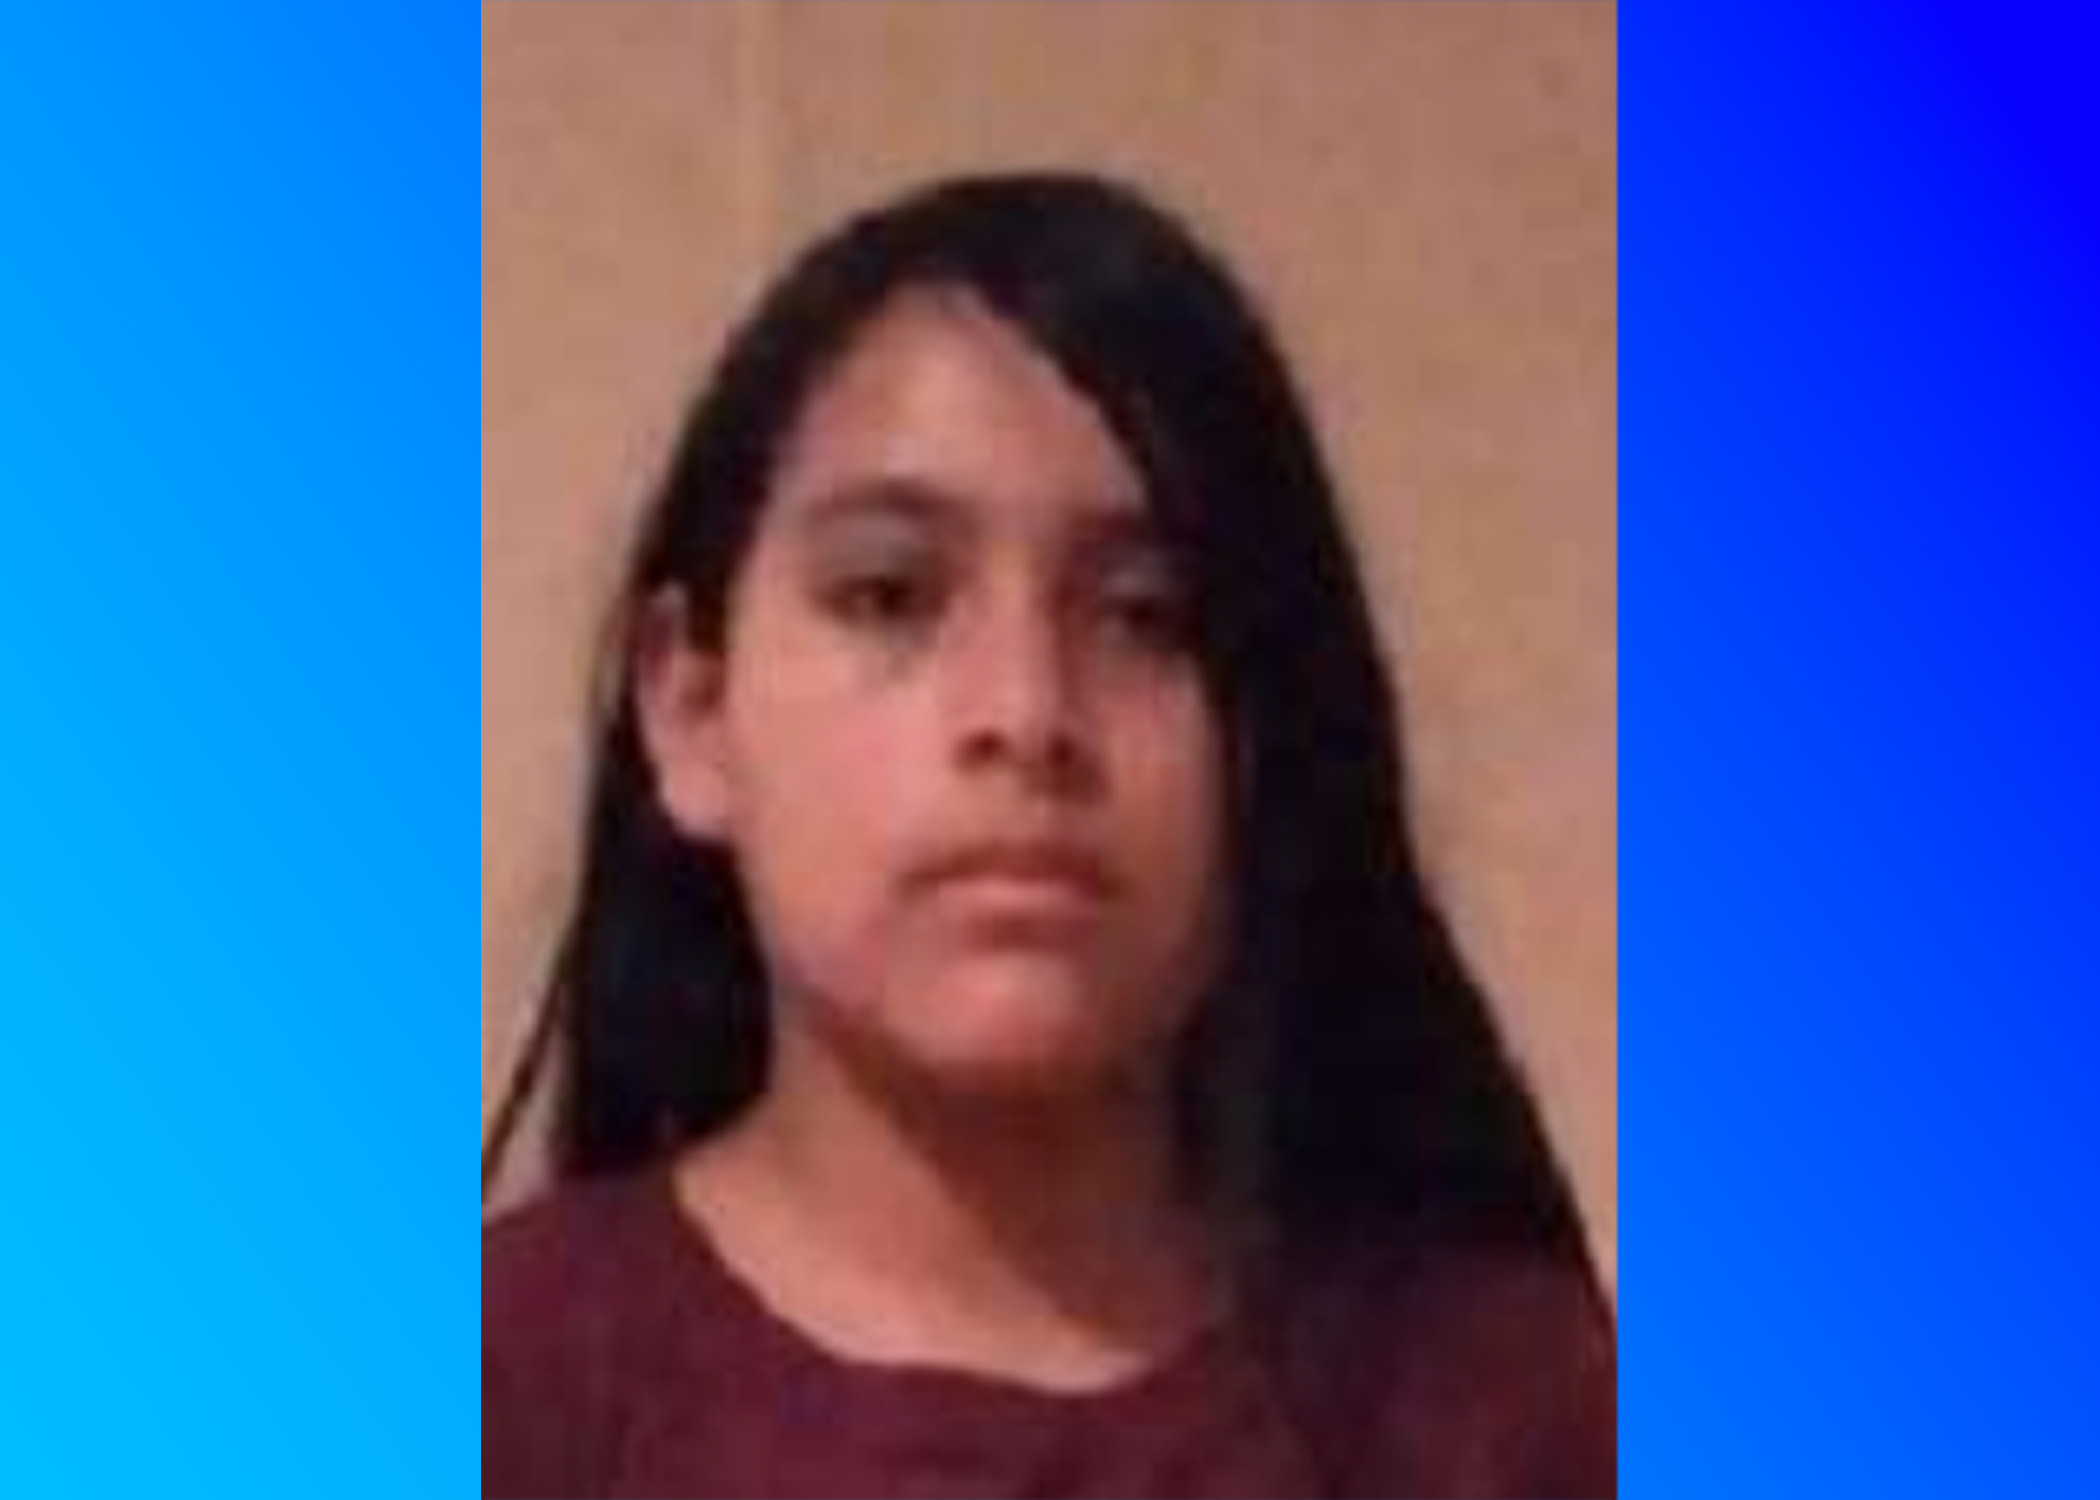 CANCELED: Emergency Missing Child Alert issued for Phenix City 11-year-old